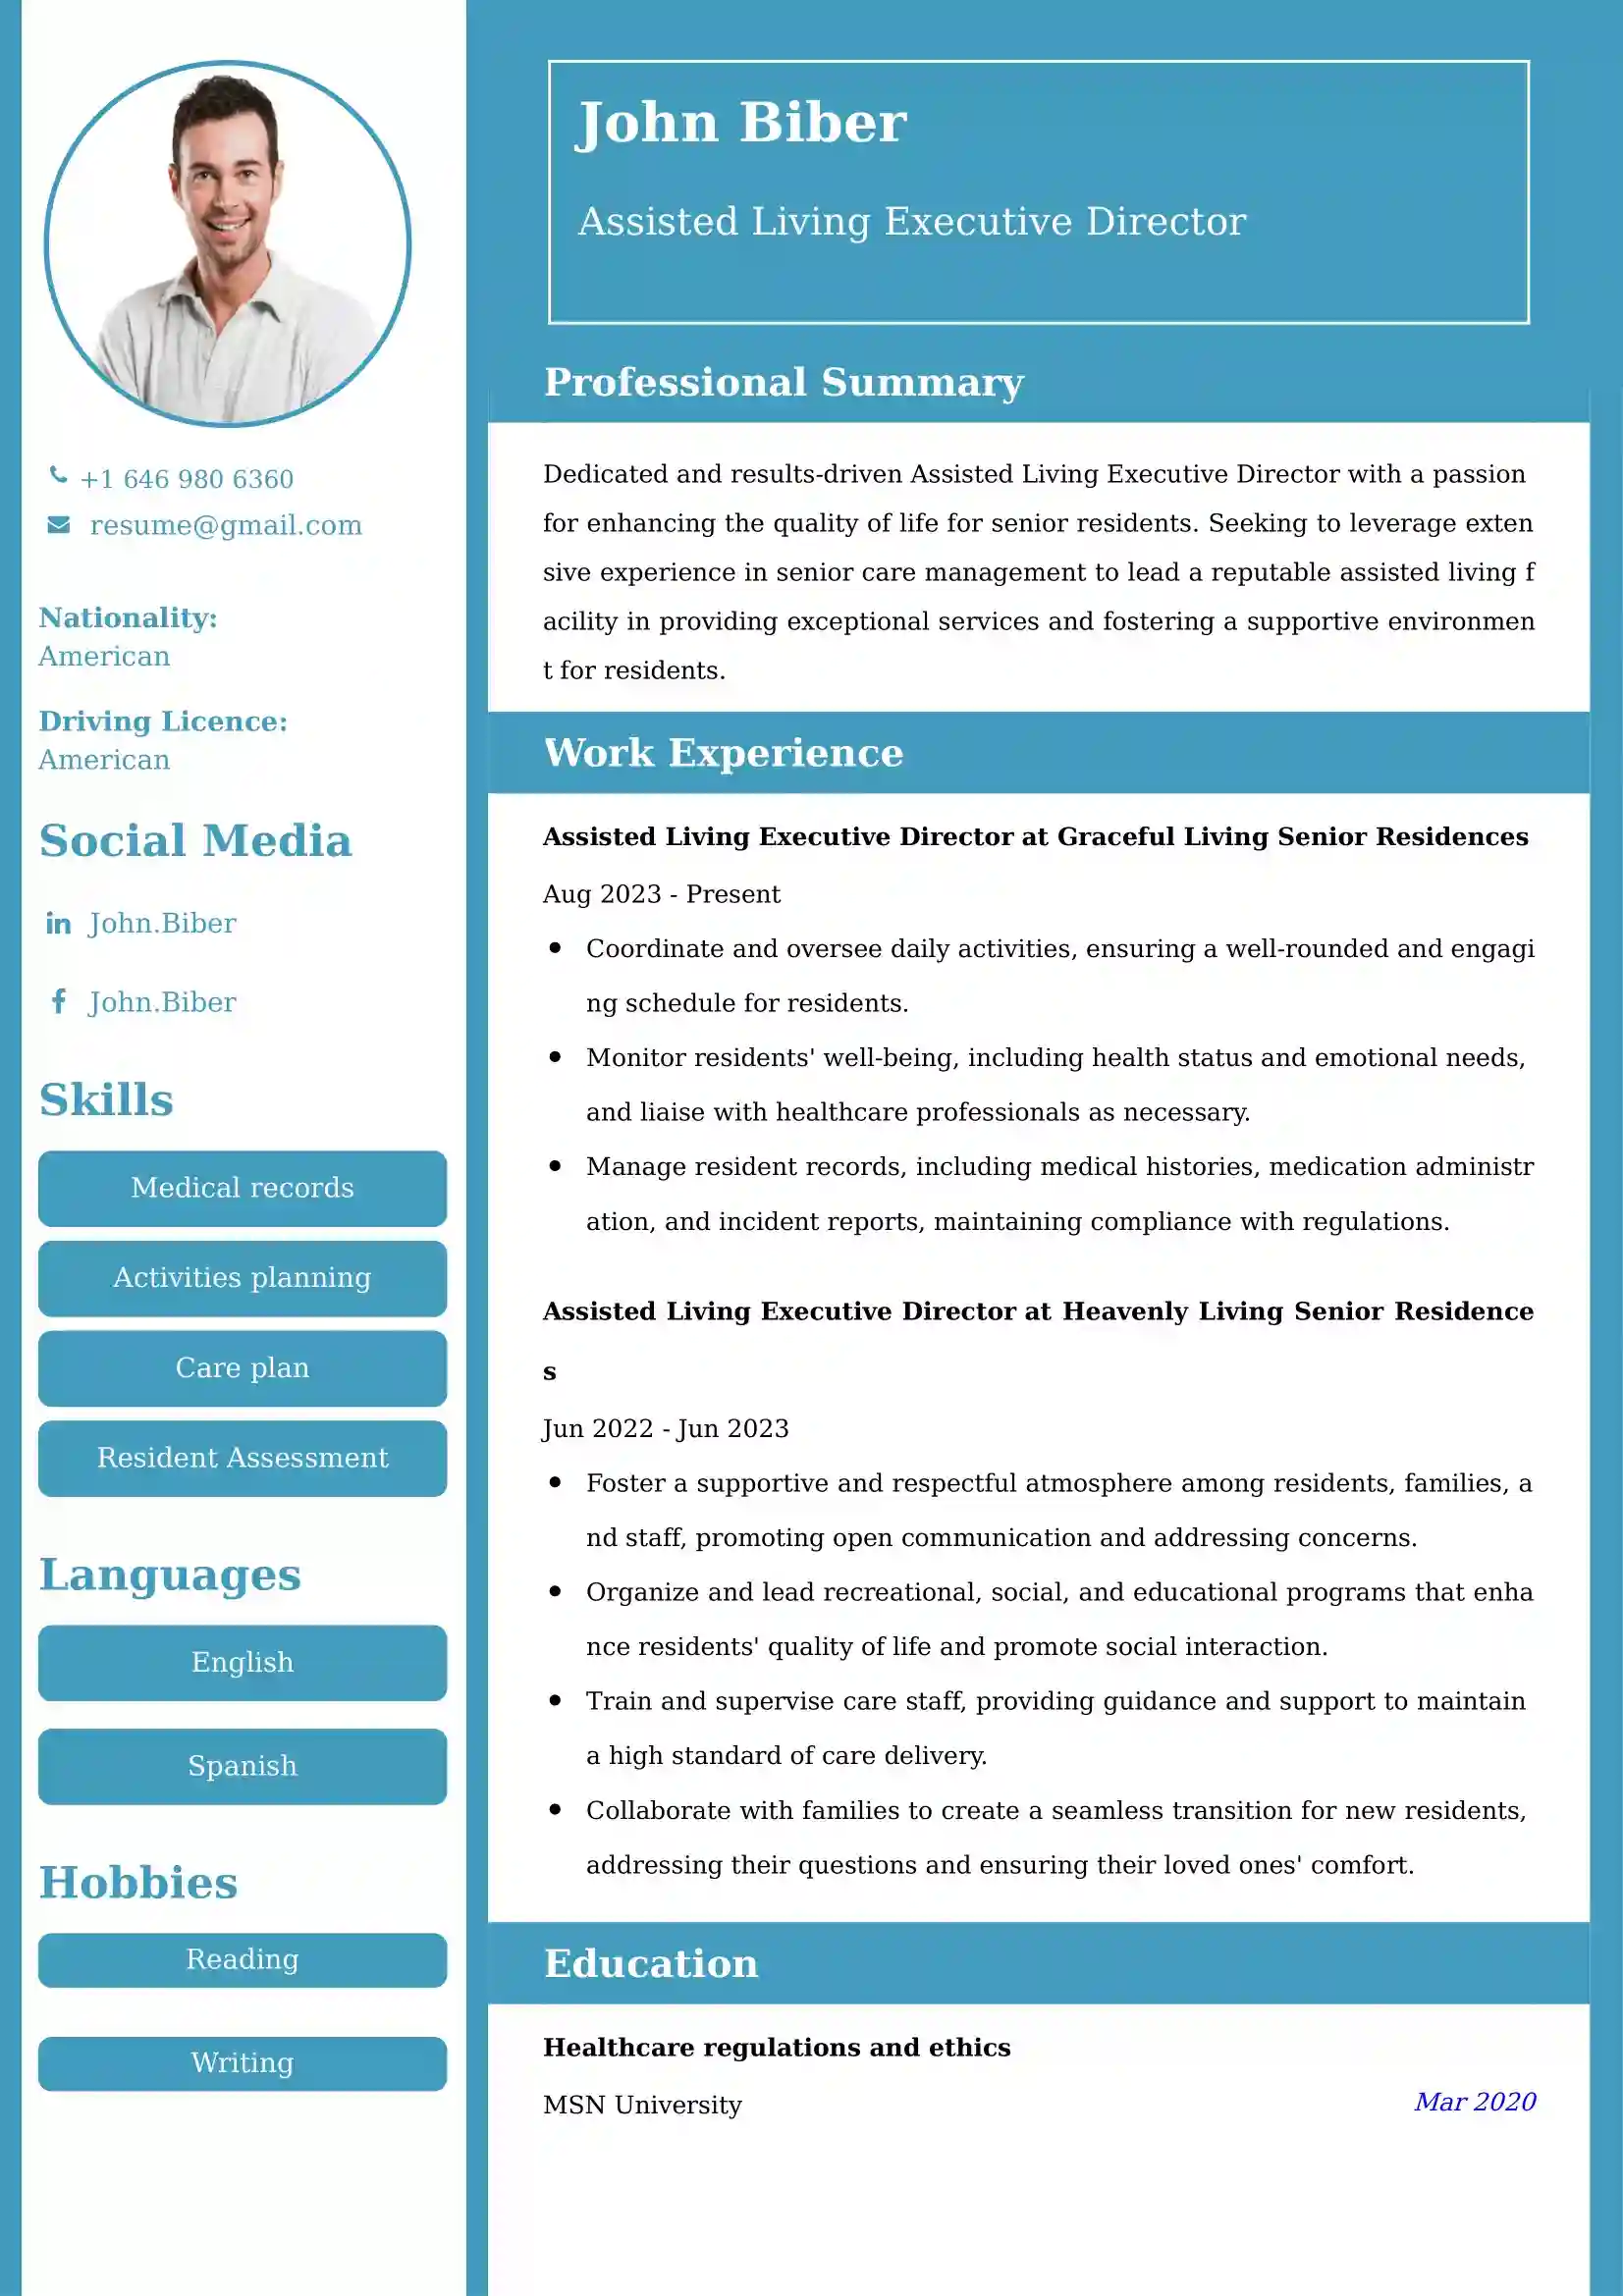 Assisted Living Executive Director Resume Examples - Brazilian Format, Latest Template